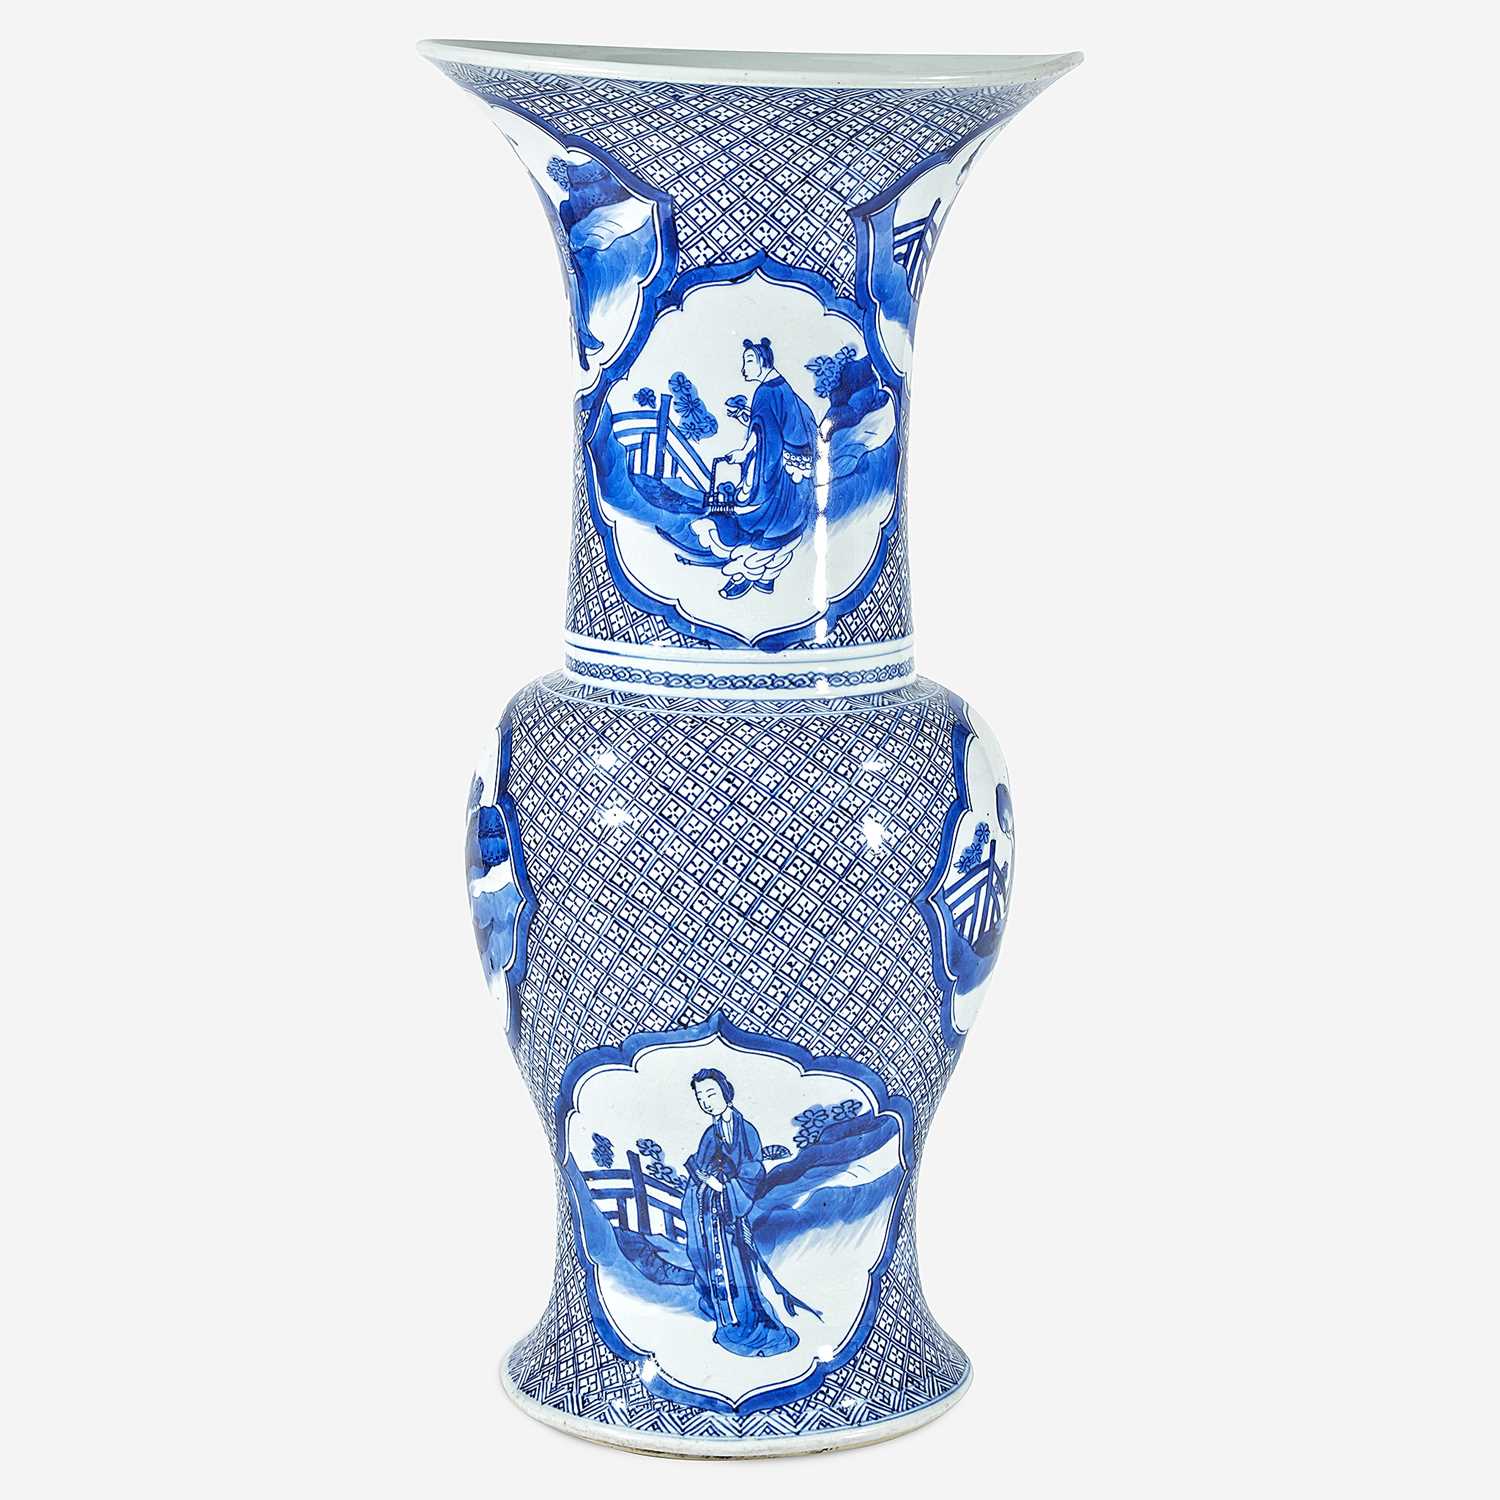 Lot 68 - A Chinese blue and white porcelain "Phoenix-tail" "Eight Daoist Immortals" vase